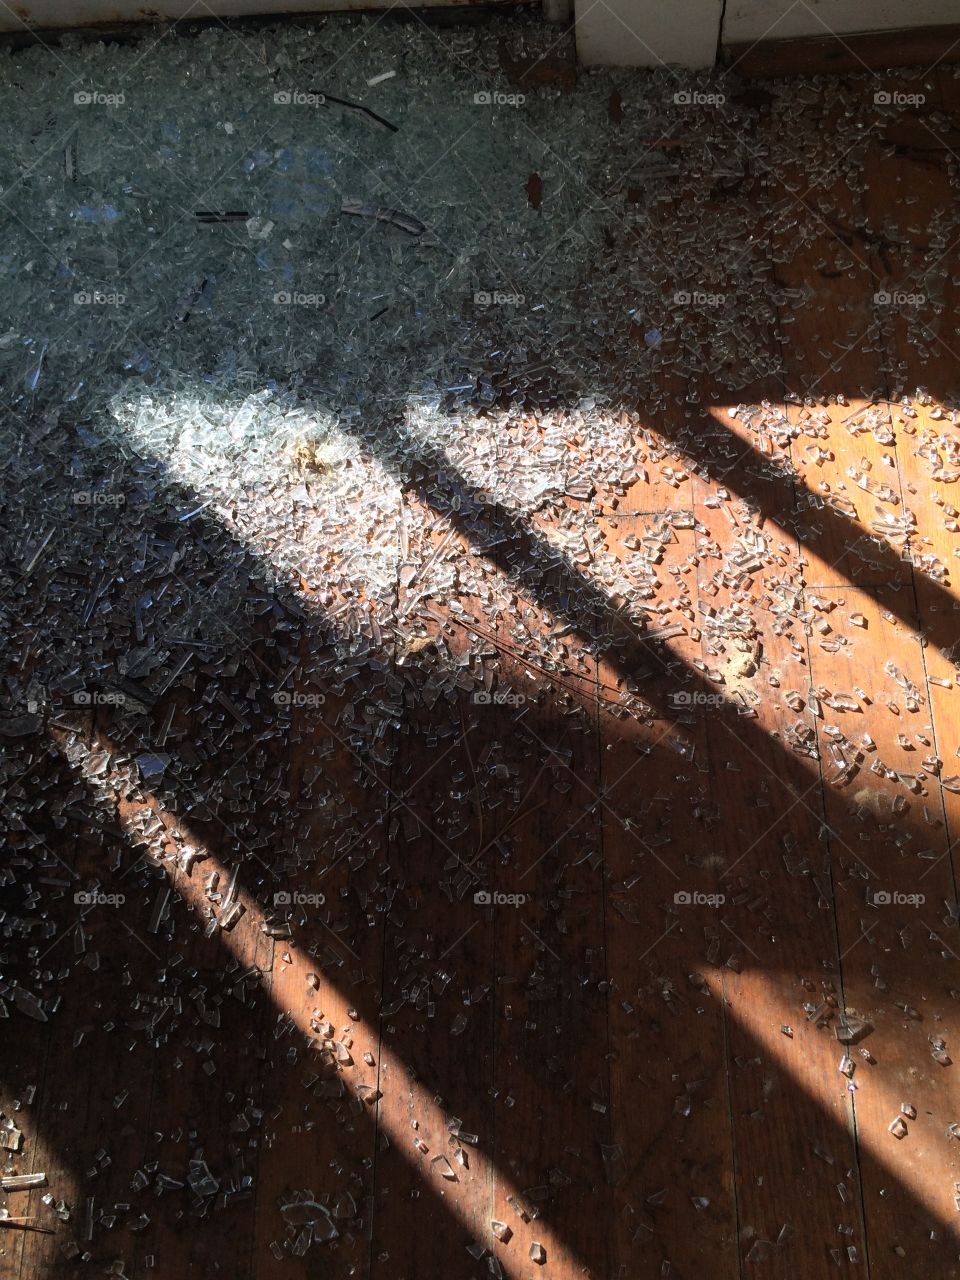 Shards of sparkling glass strewn across an old wooden floor. The light from the window streaming in geometric patterns. 